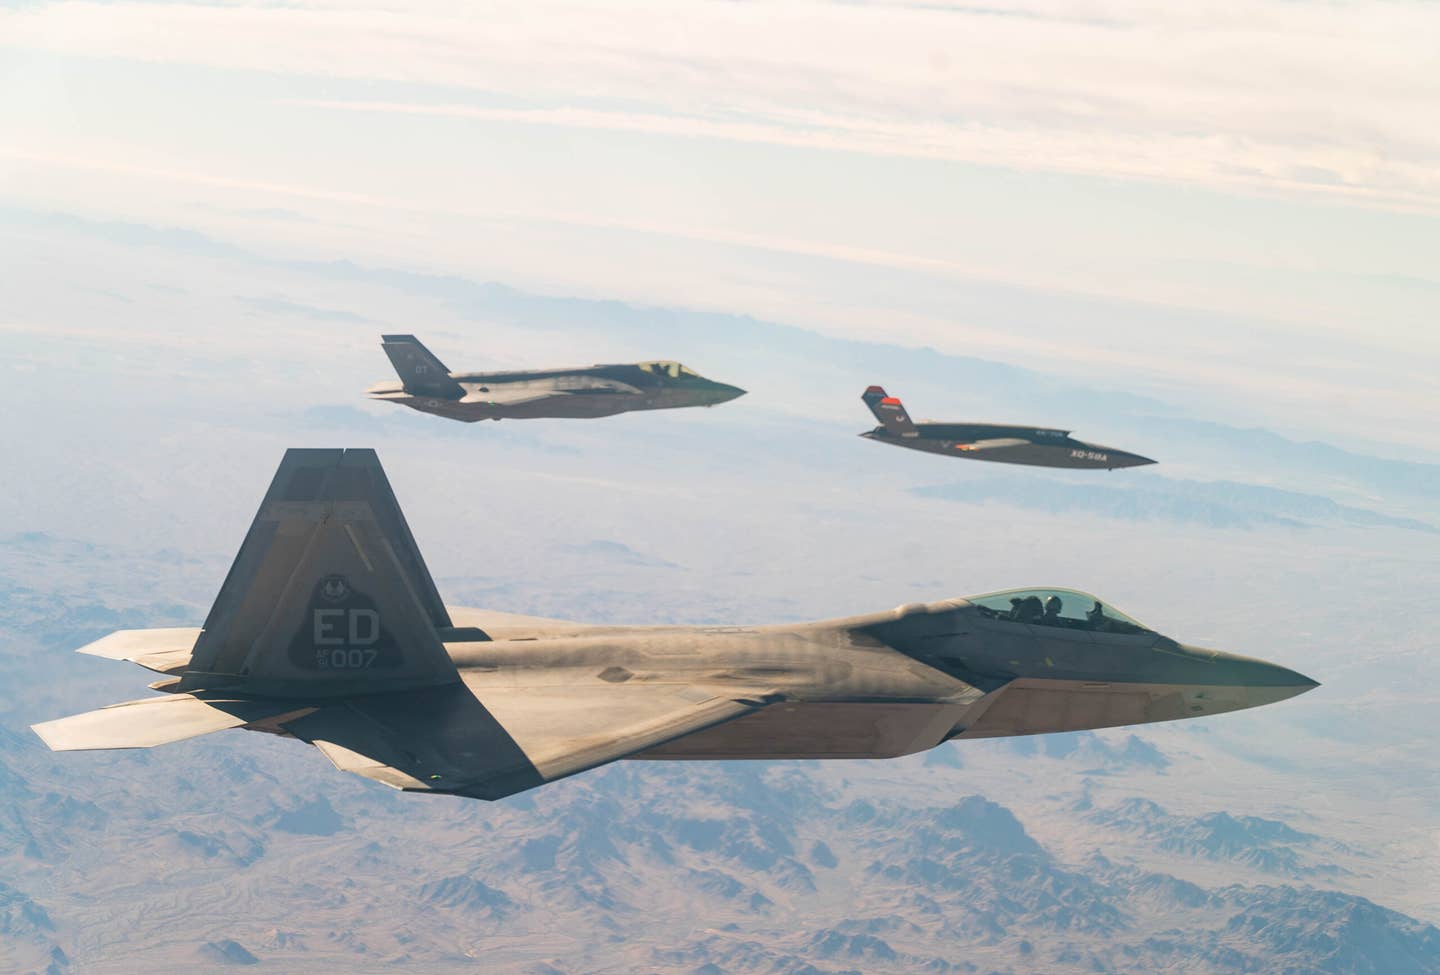 A U.S. Air Force F-22 Raptor and F-35A Lightning II fly in formation with the XQ-58A Valkyrie over the U.S. Army Yuma Proving Ground testing range, Ariz., during a series of tests Dec. 9, 2020. <em>Credit: U.S. Air Force photo by Tech. Sgt. James Cason</em>